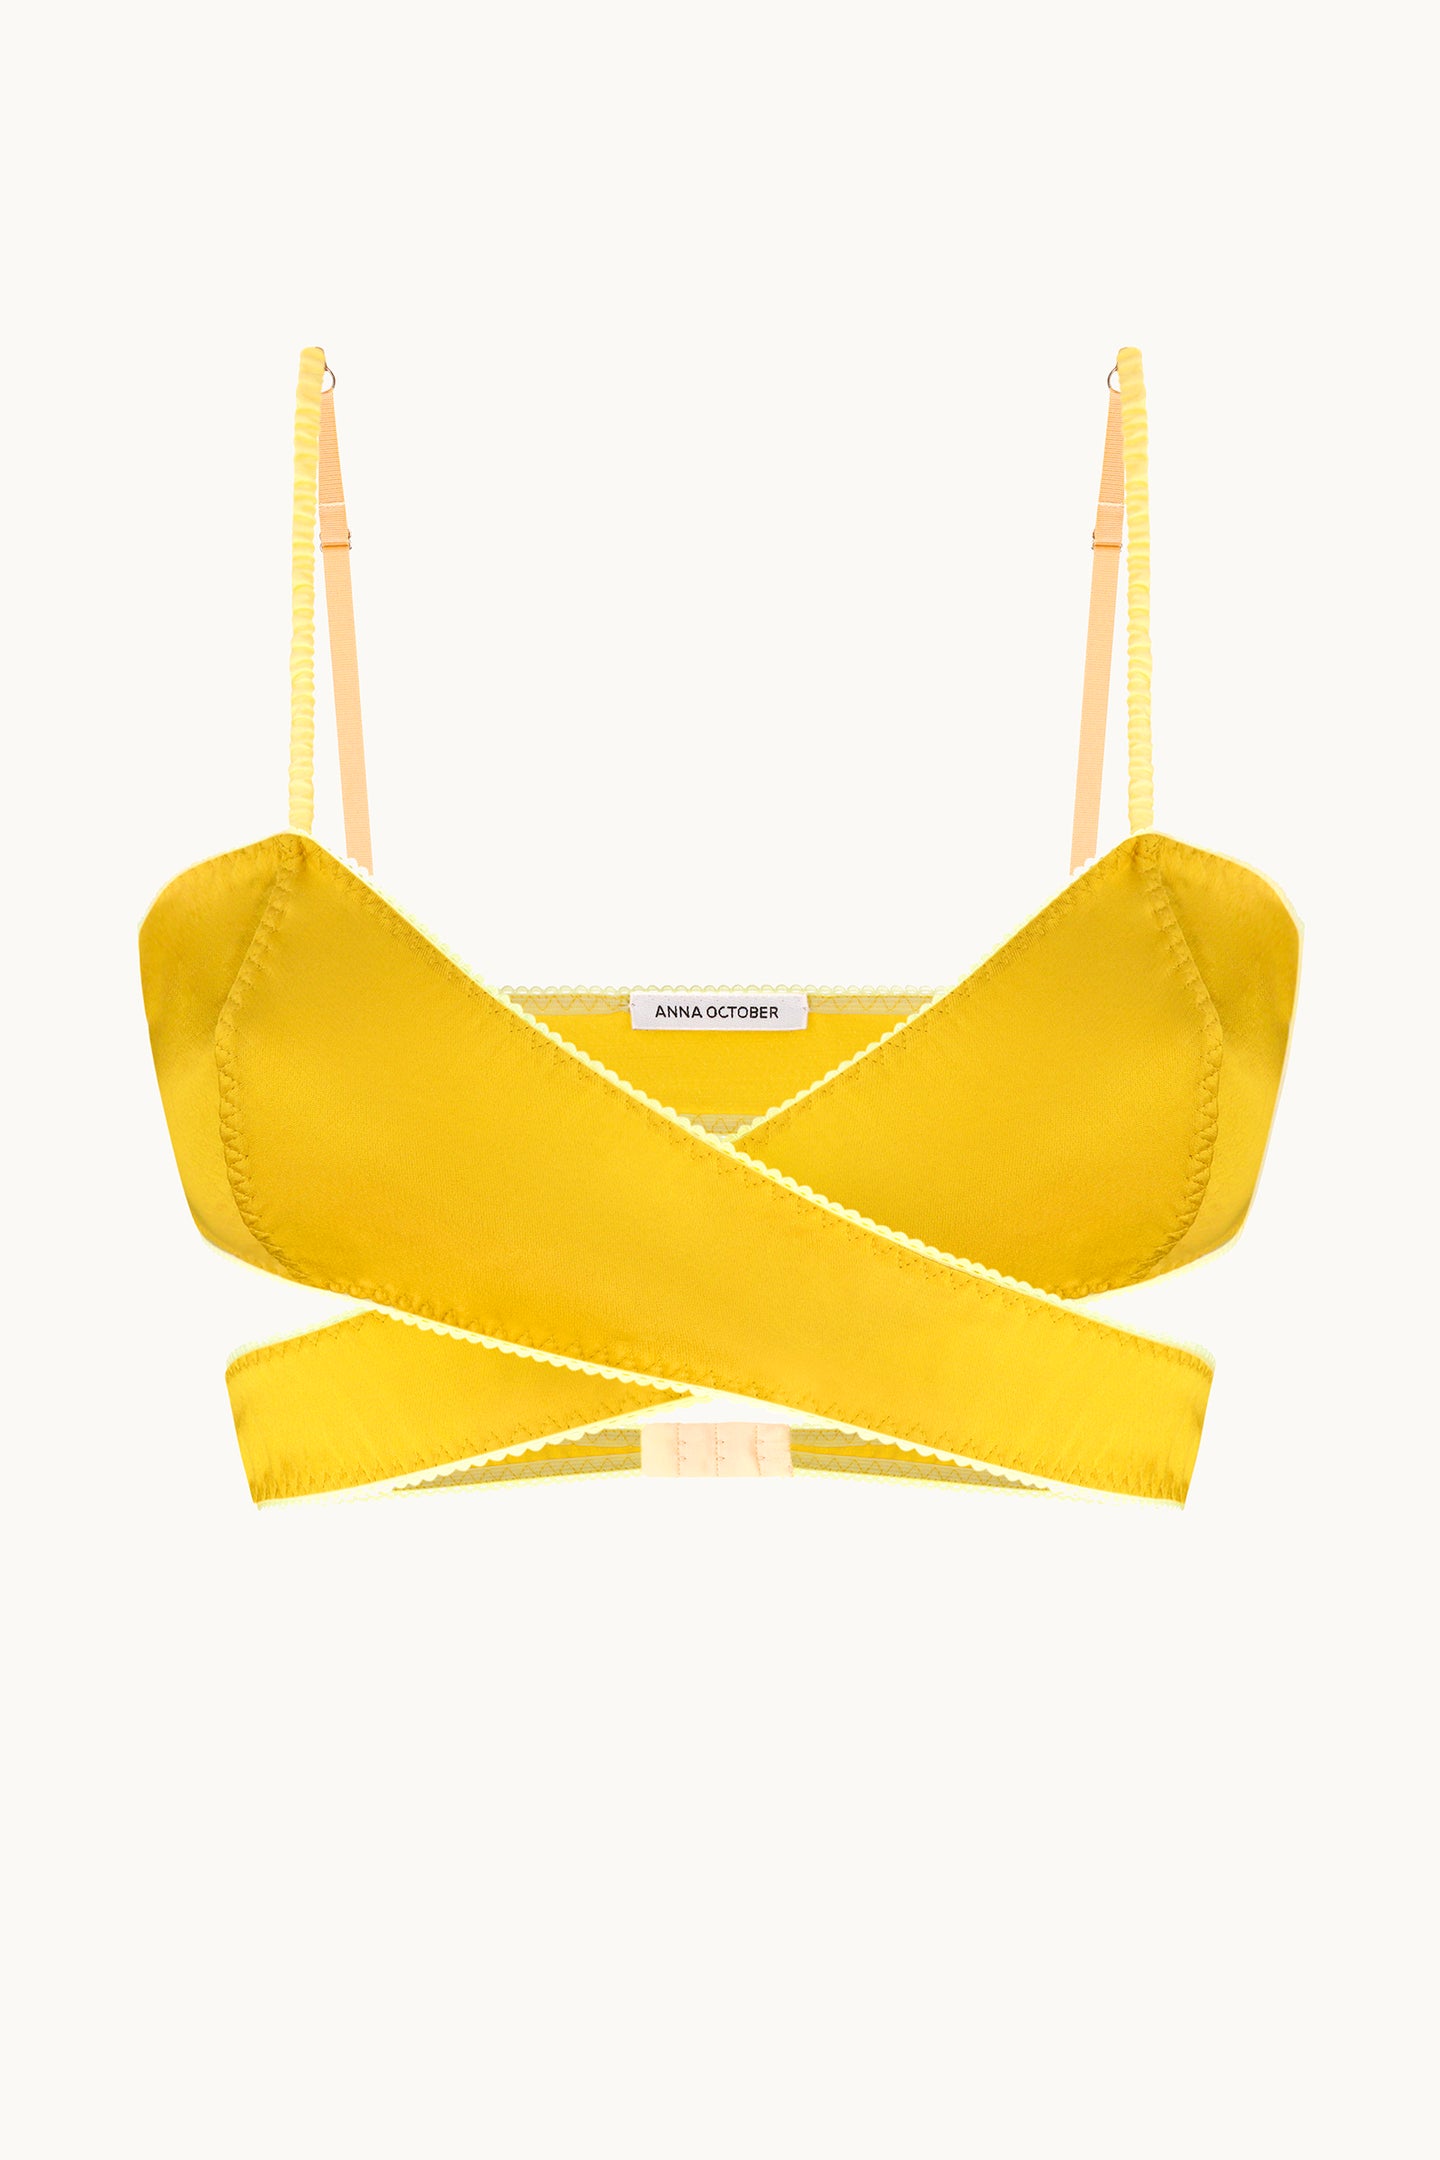 Lotus yellow brassiere front view